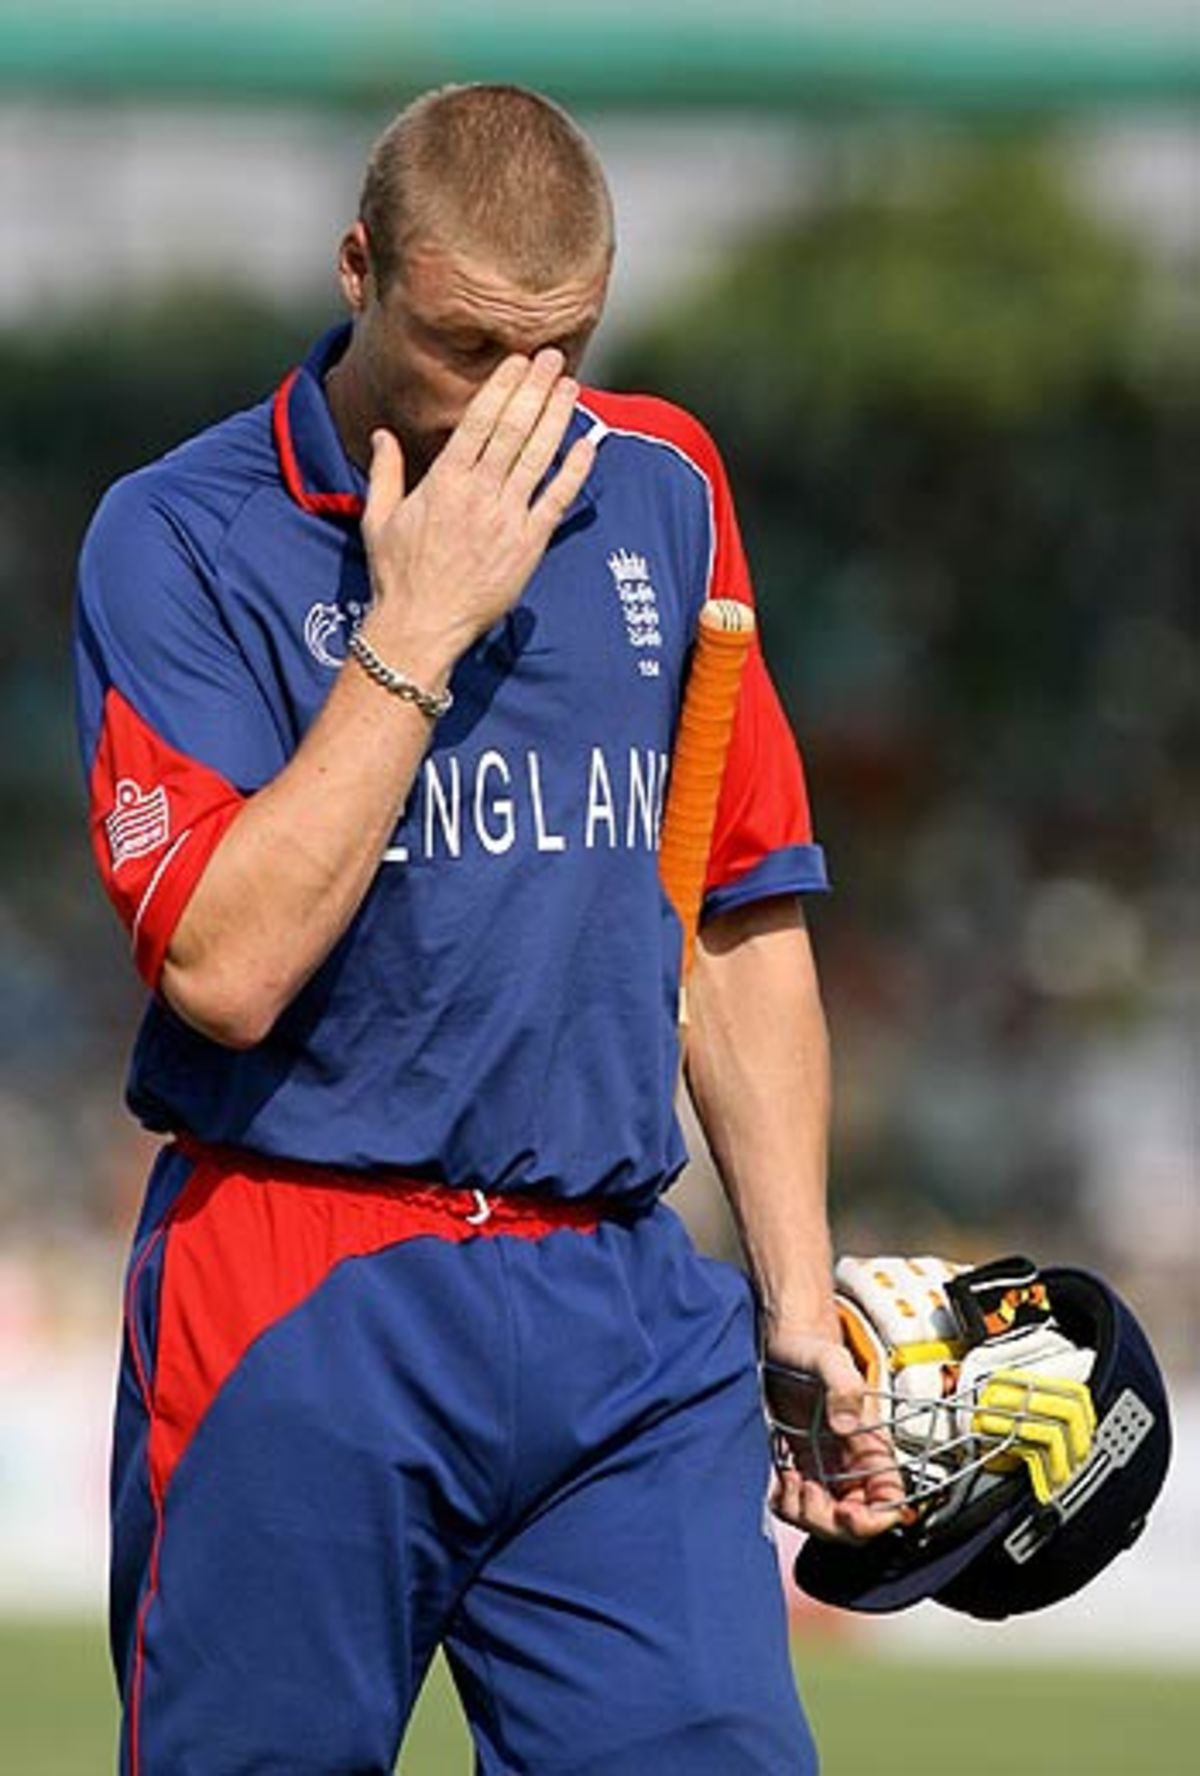 The decision to send Andrew Flintoff at No.3 fell flat in England's face, India v England, 1st match, Champions Trophy, Sawai Mansingh Stadium, Jaipur, October 15, 2006